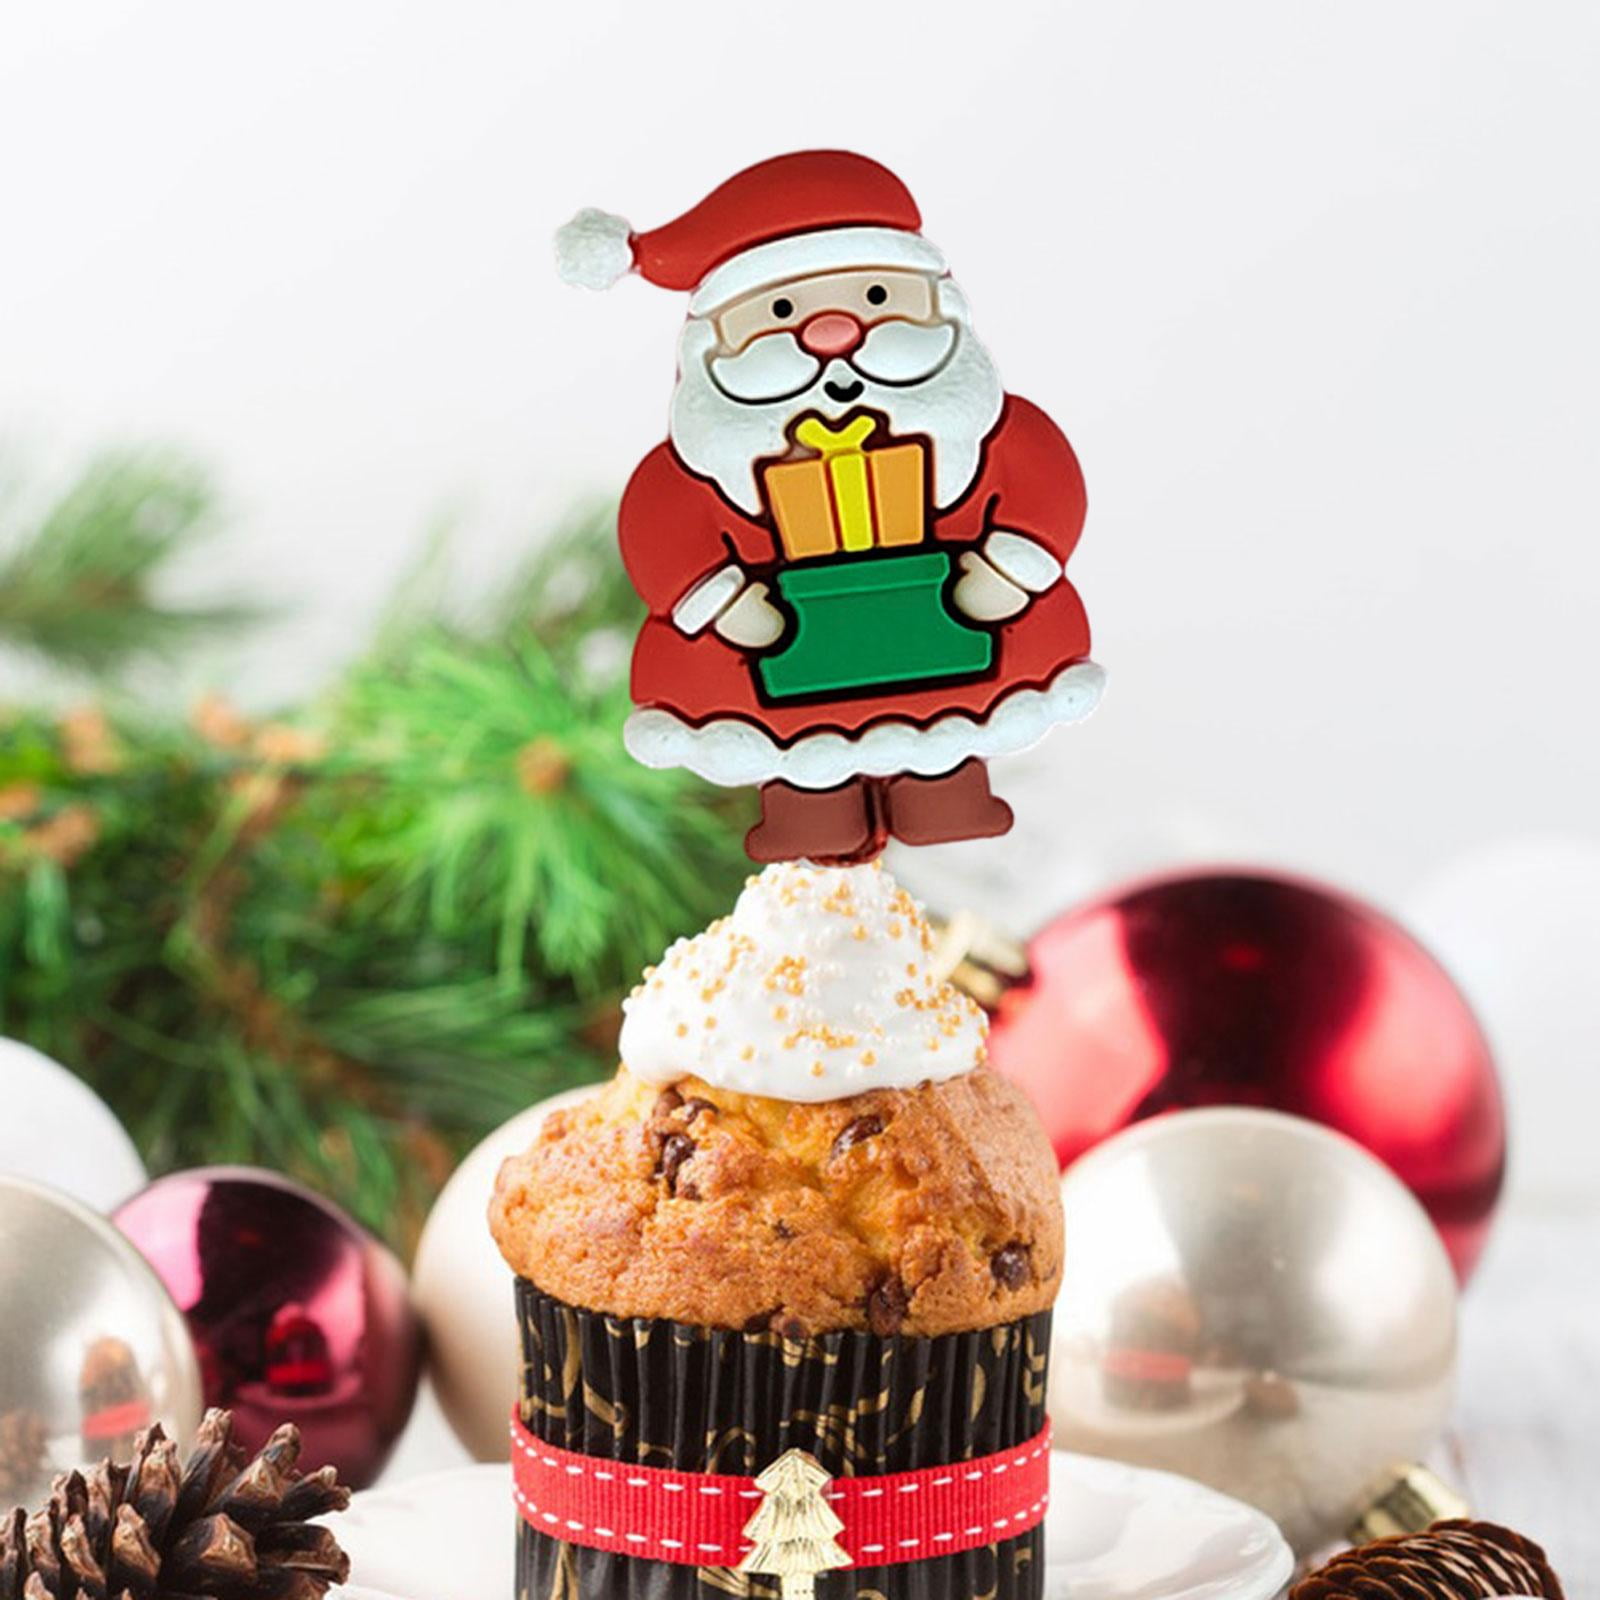 Buy 10 Pcs Christmas Decor Toppers Para Comida Cake Insert Paper Cup Hat  Ornaments Food Topersitos Online